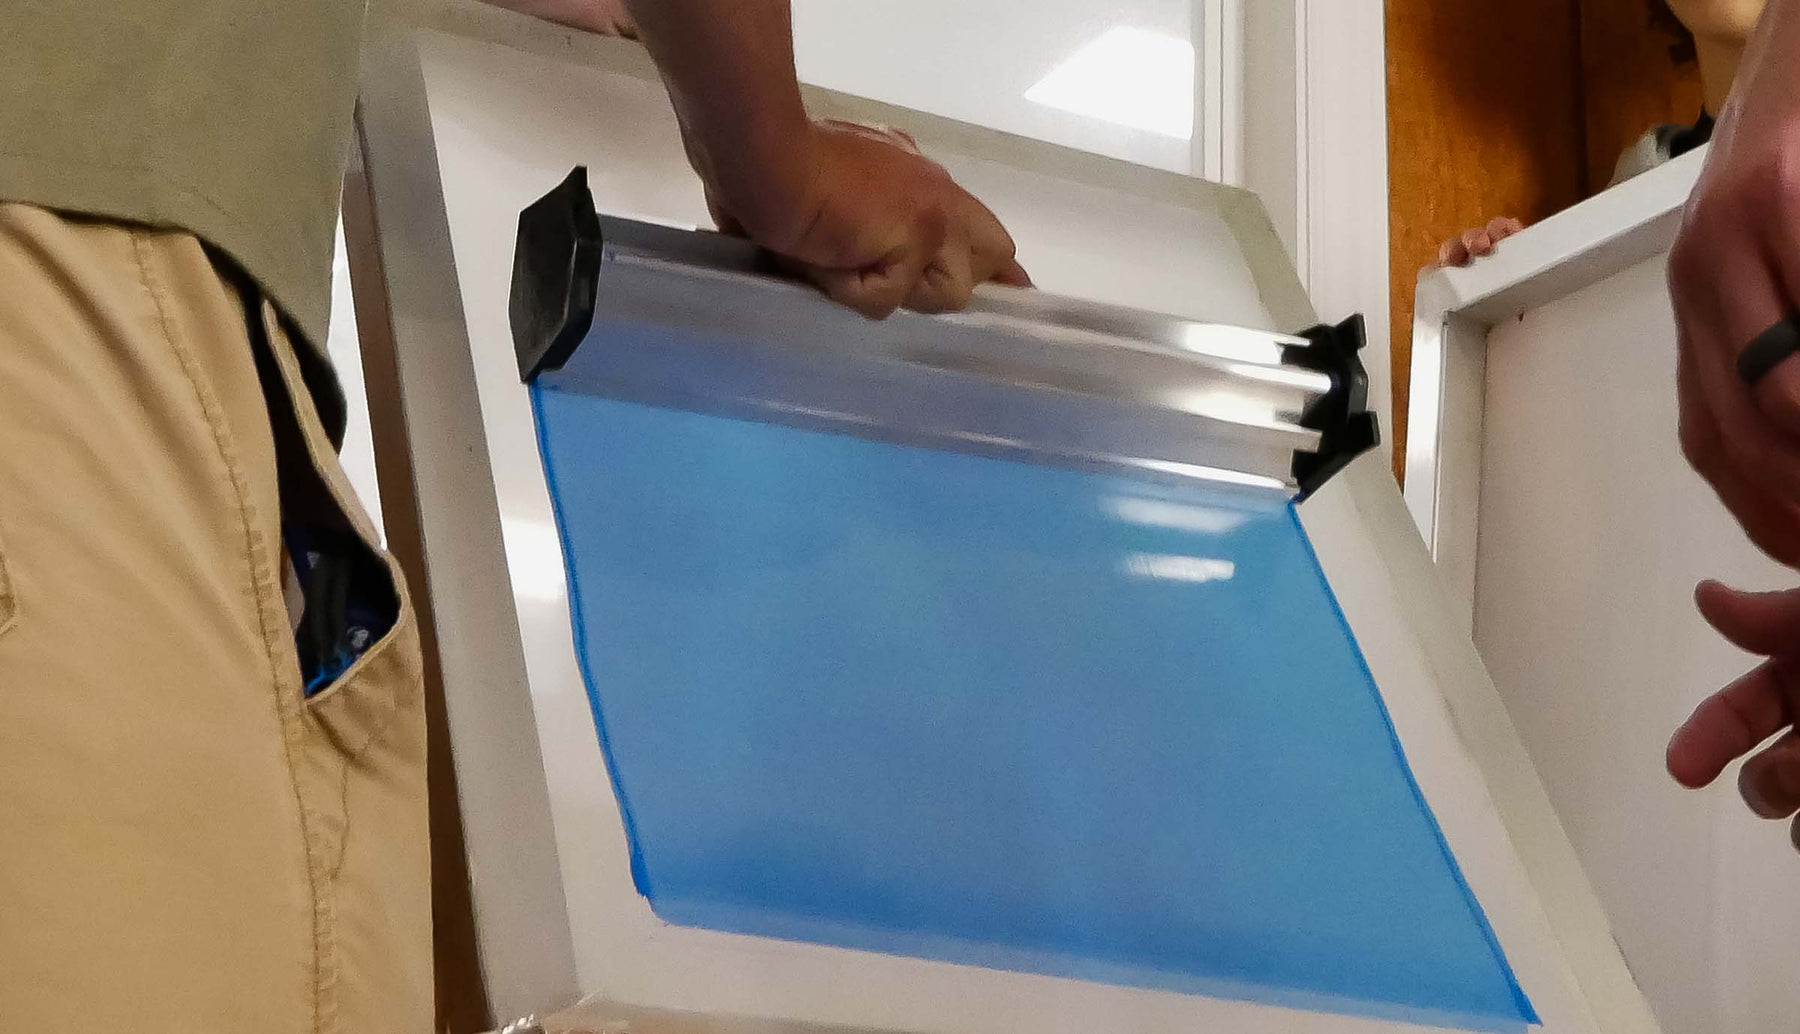 Screen Printing Emulsion - What Are My Options